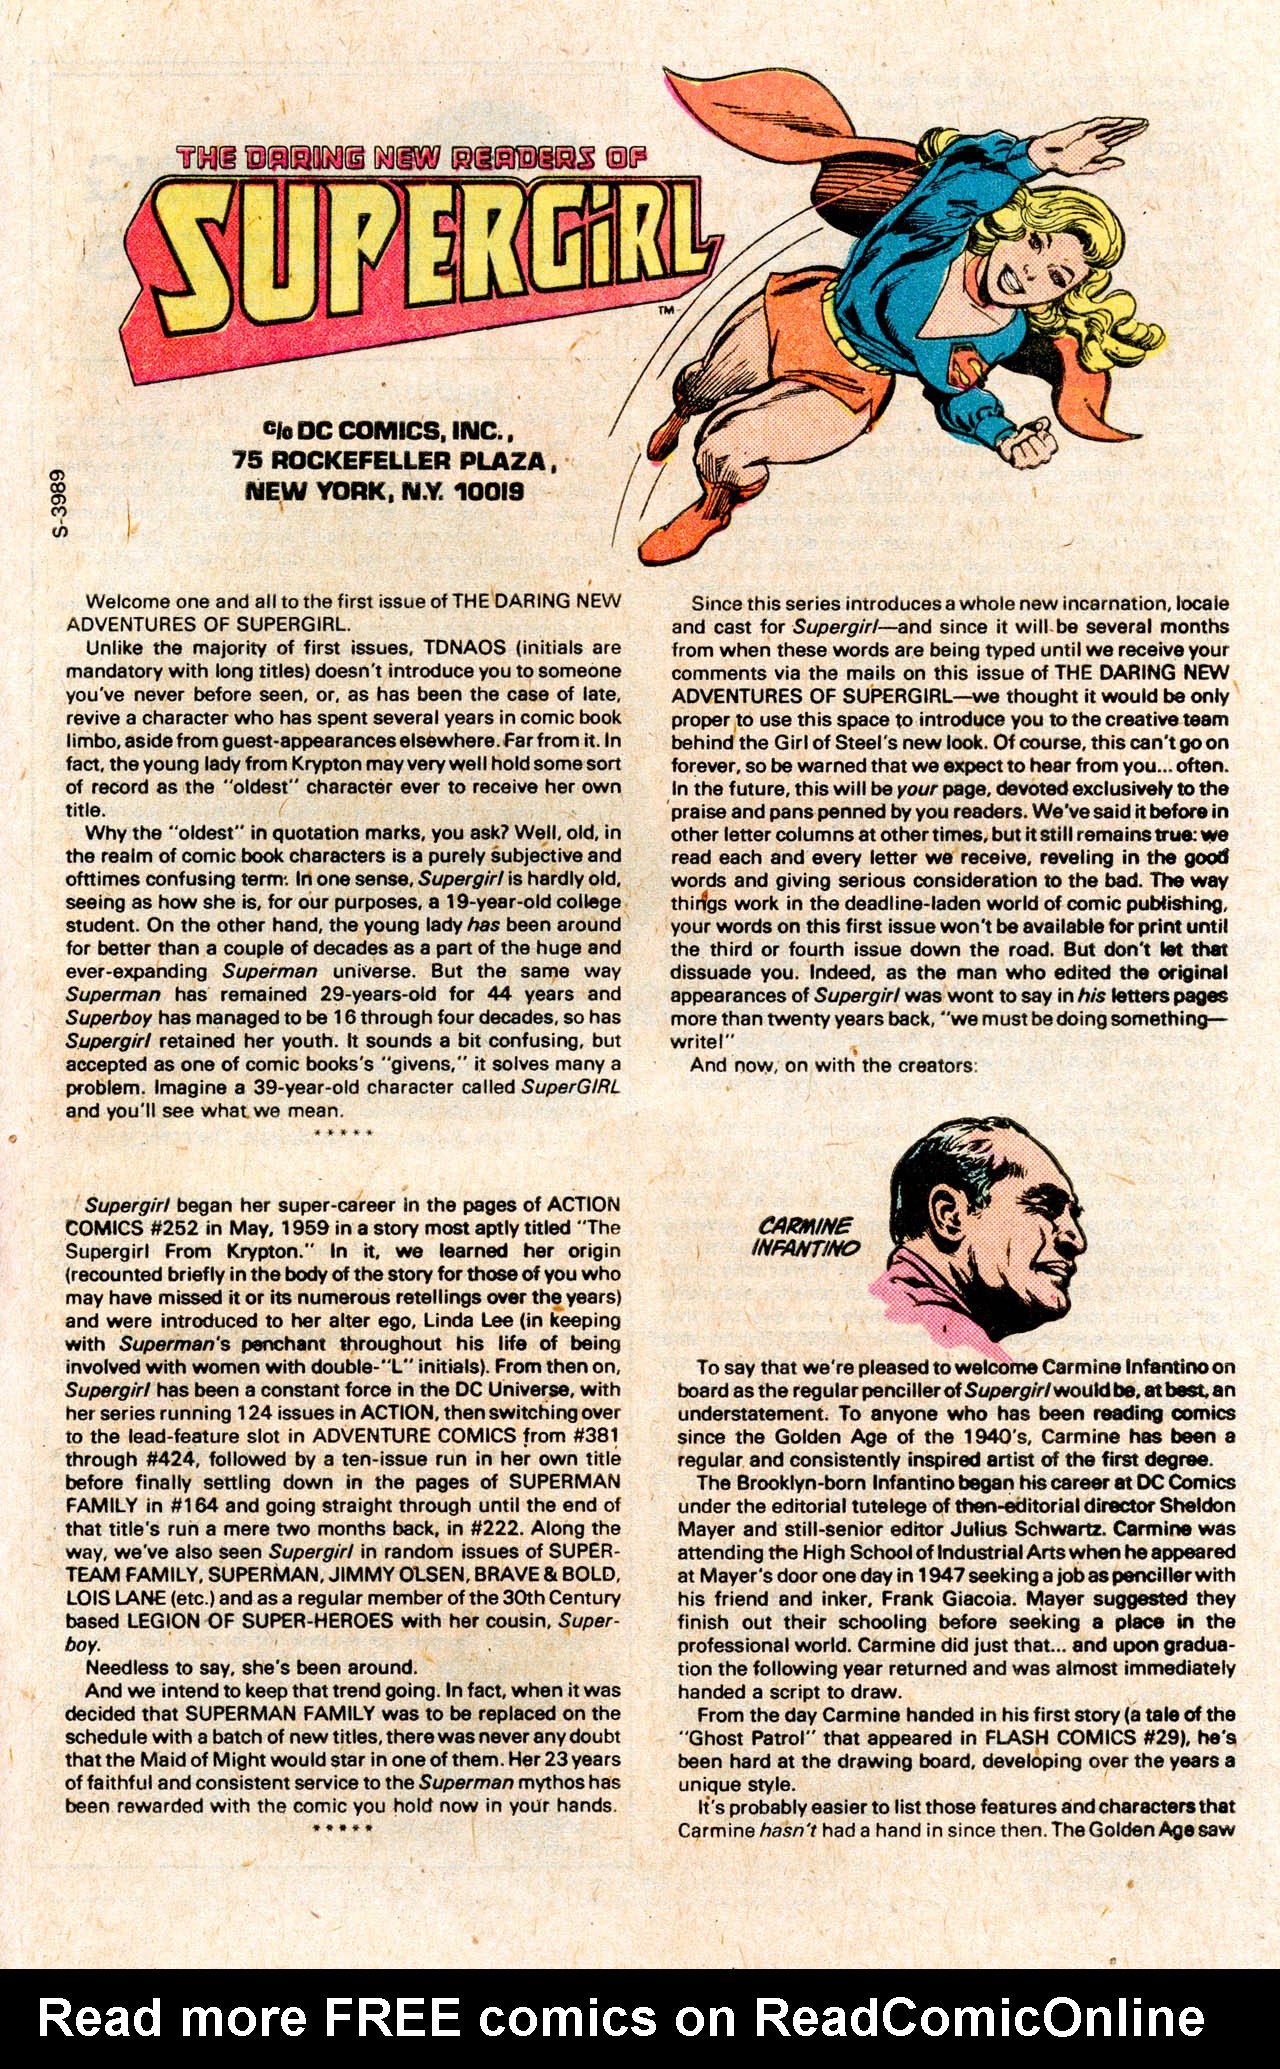 Supergirl (1982) 1 Page 48